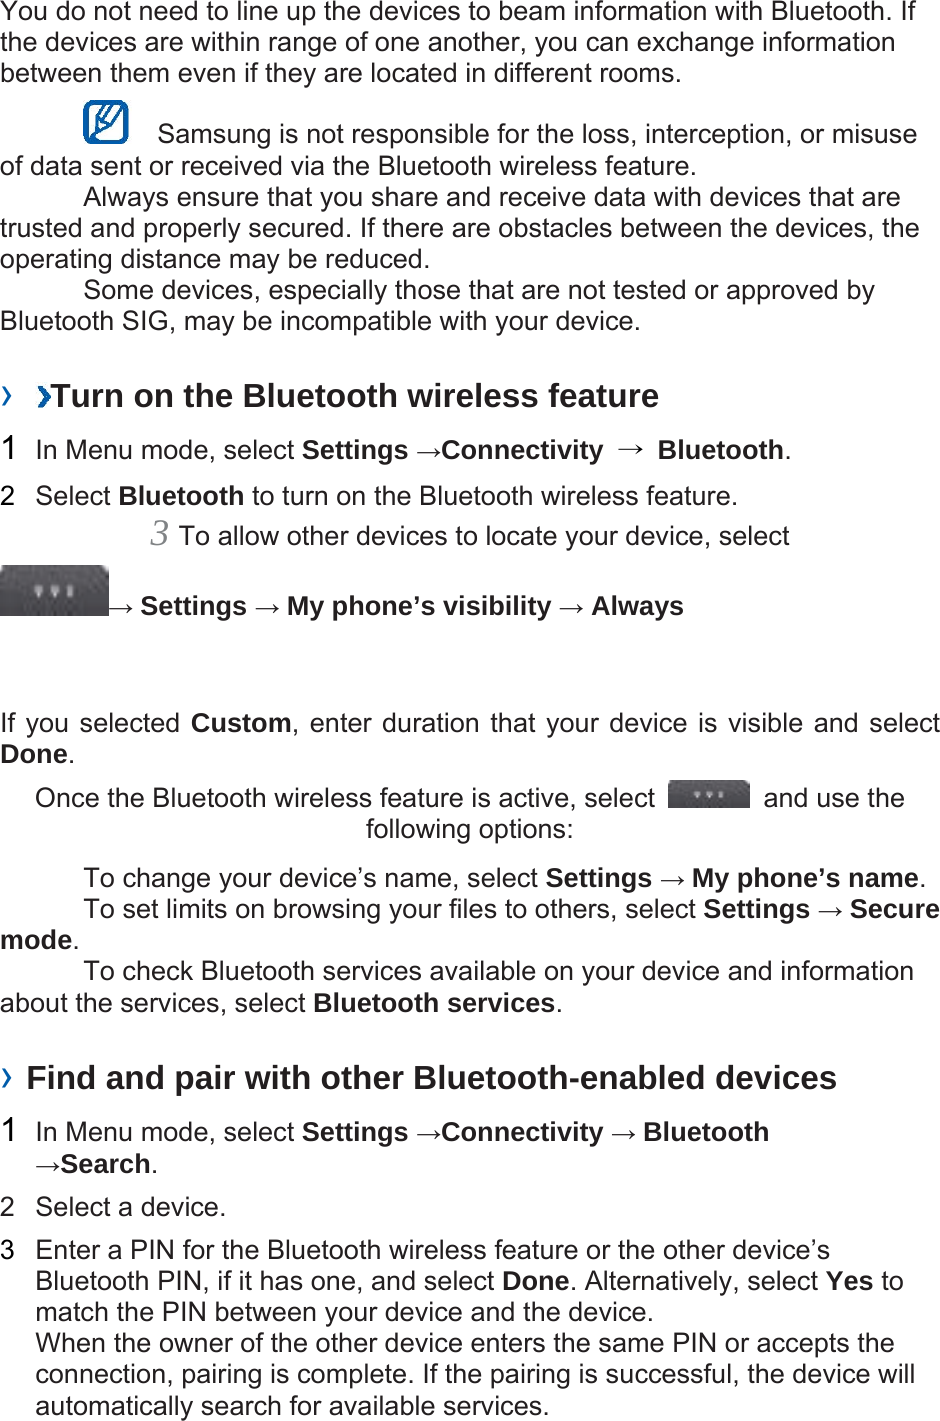 You do not need to line up the devices to beam information with Bluetooth. If the devices are within range of one another, you can exchange information between them even if they are located in different rooms.      Samsung is not responsible for the loss, interception, or misuse of data sent or received via the Bluetooth wireless feature.     Always ensure that you share and receive data with devices that are trusted and properly secured. If there are obstacles between the devices, the operating distance may be reduced.     Some devices, especially those that are not tested or approved by Bluetooth SIG, may be incompatible with your device.    ›  Turn on the Bluetooth wireless feature   1  In Menu mode, select Settings →Connectivity  → Bluetooth.  2  Select Bluetooth to turn on the Bluetooth wireless feature.   3 To allow other devices to locate your device, select   → Settings → My phone’s visibility → Always   If you selected Custom, enter duration that your device is visible and select Done.  Once the Bluetooth wireless feature is active, select    and use the following options:     To change your device’s name, select Settings → My phone’s name.    To set limits on browsing your files to others, select Settings → Secure mode.    To check Bluetooth services available on your device and information about the services, select Bluetooth services.   › Find and pair with other Bluetooth-enabled devices   1  In Menu mode, select Settings →Connectivity → Bluetooth →Search.  2  Select a device.   3  Enter a PIN for the Bluetooth wireless feature or the other device’s Bluetooth PIN, if it has one, and select Done. Alternatively, select Yes to match the PIN between your device and the device.   When the owner of the other device enters the same PIN or accepts the connection, pairing is complete. If the pairing is successful, the device will automatically search for available services.   